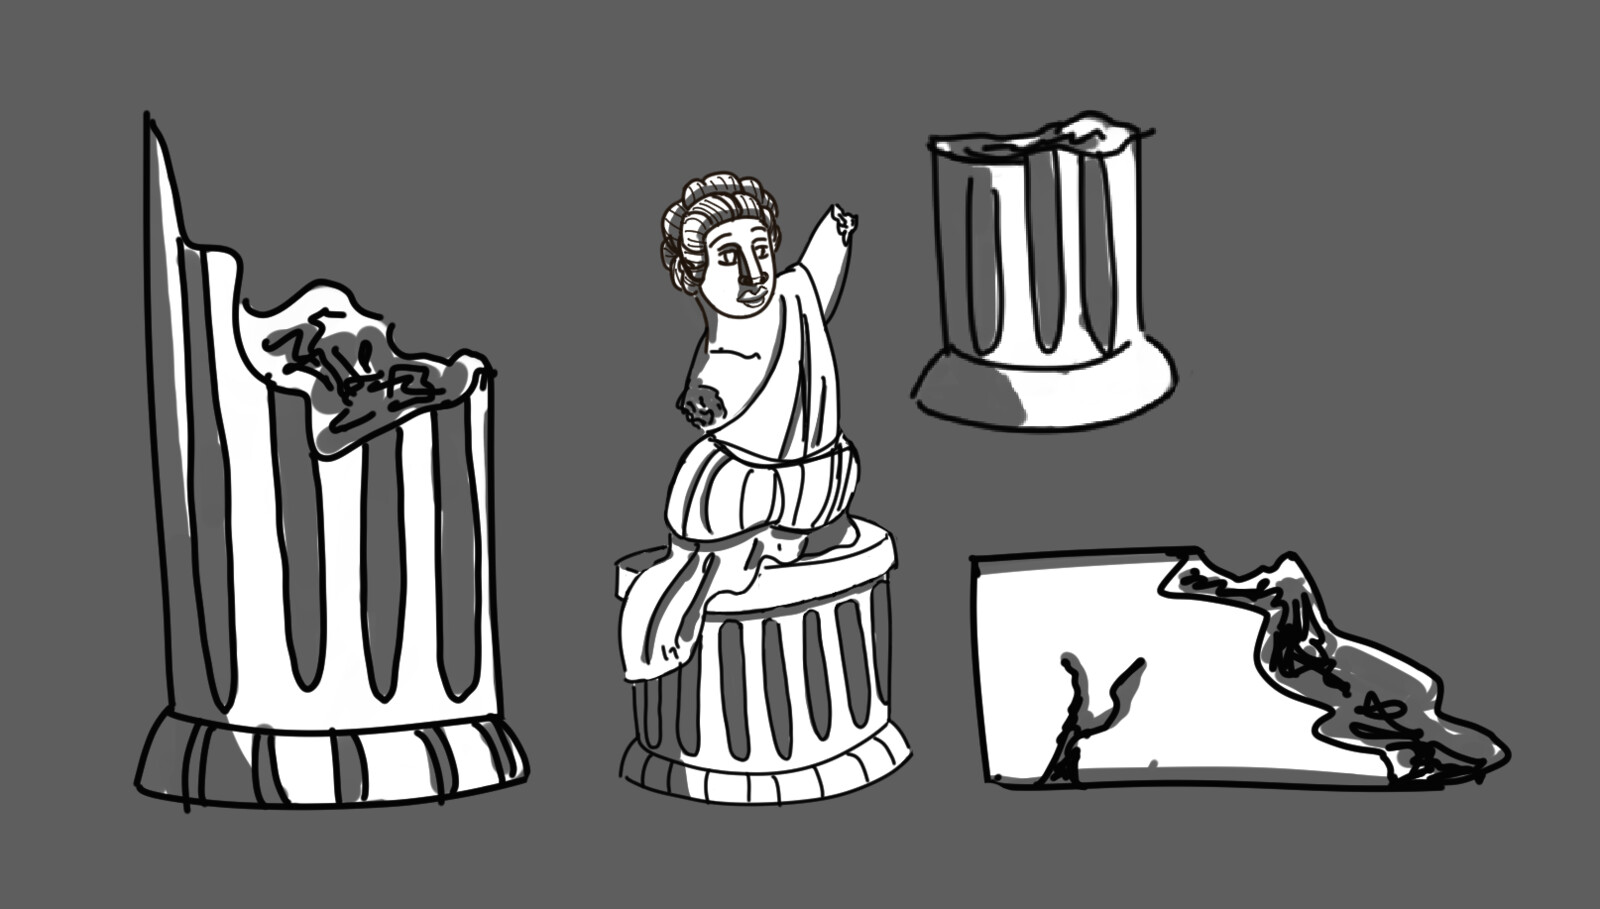 Beach Day Studios
Assets for a greek inspired level